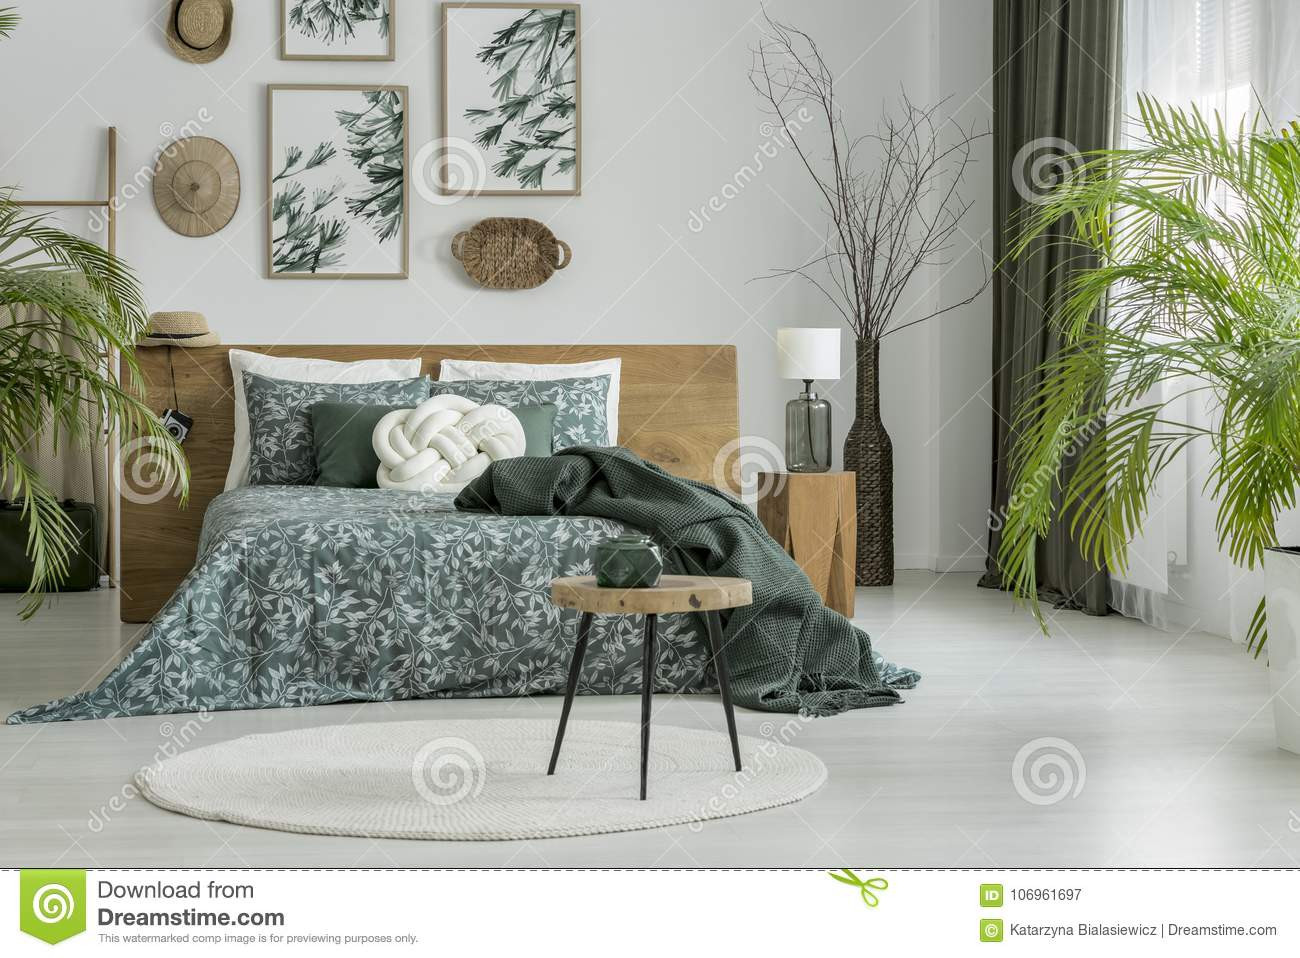 29 Lovely Hardwood Floors or Carpet In Bedrooms 2024 free download hardwood floors or carpet in bedrooms of round carpet in green bedroom stock image image of design poster with regard to round carpet in green bedroom